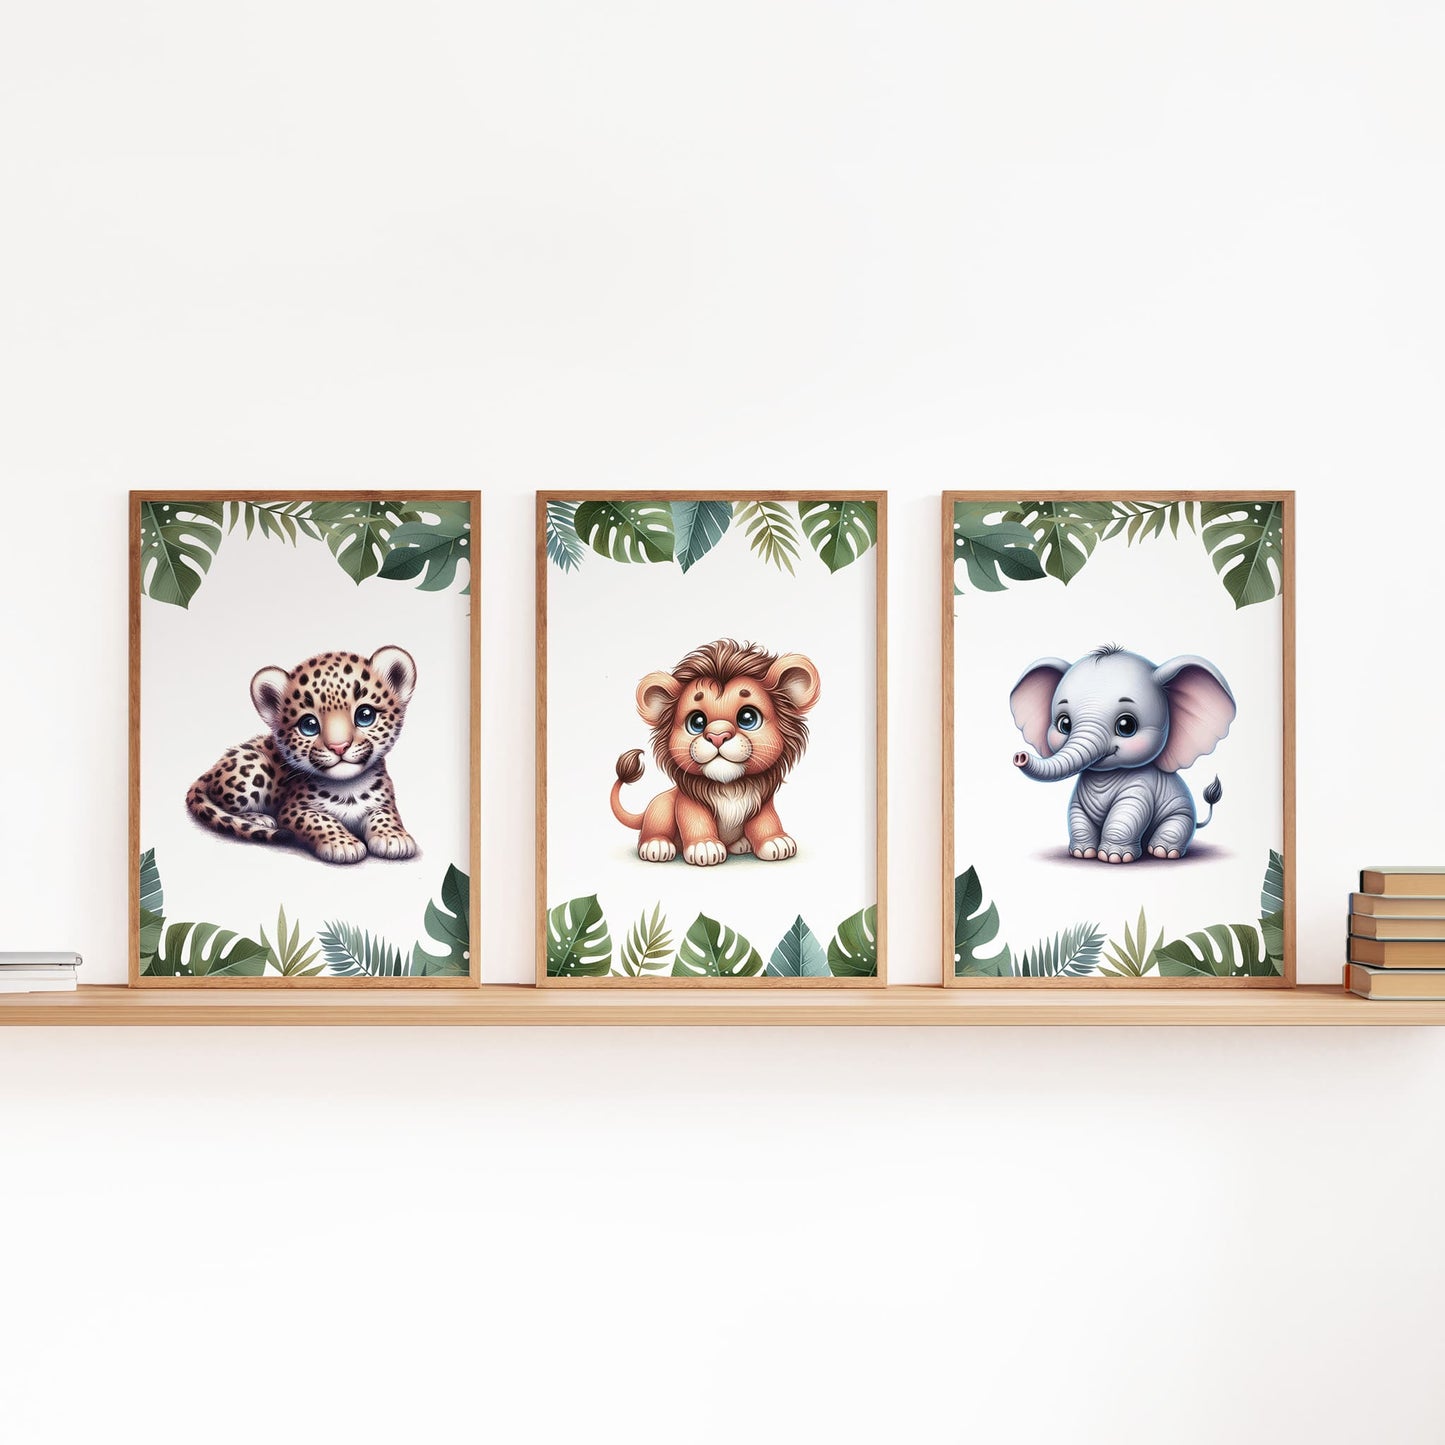 FIrst three of a set of six A4 prints featuring safari animals - lion cub, tiger cub, cheetah cub, elephant, giraffe, and zebra. The animals are depicted as baby animals, in a cartoony and bright style reminiscent of coloured pencil drawings. Jungle-style leaves adorn the edges of the prints.